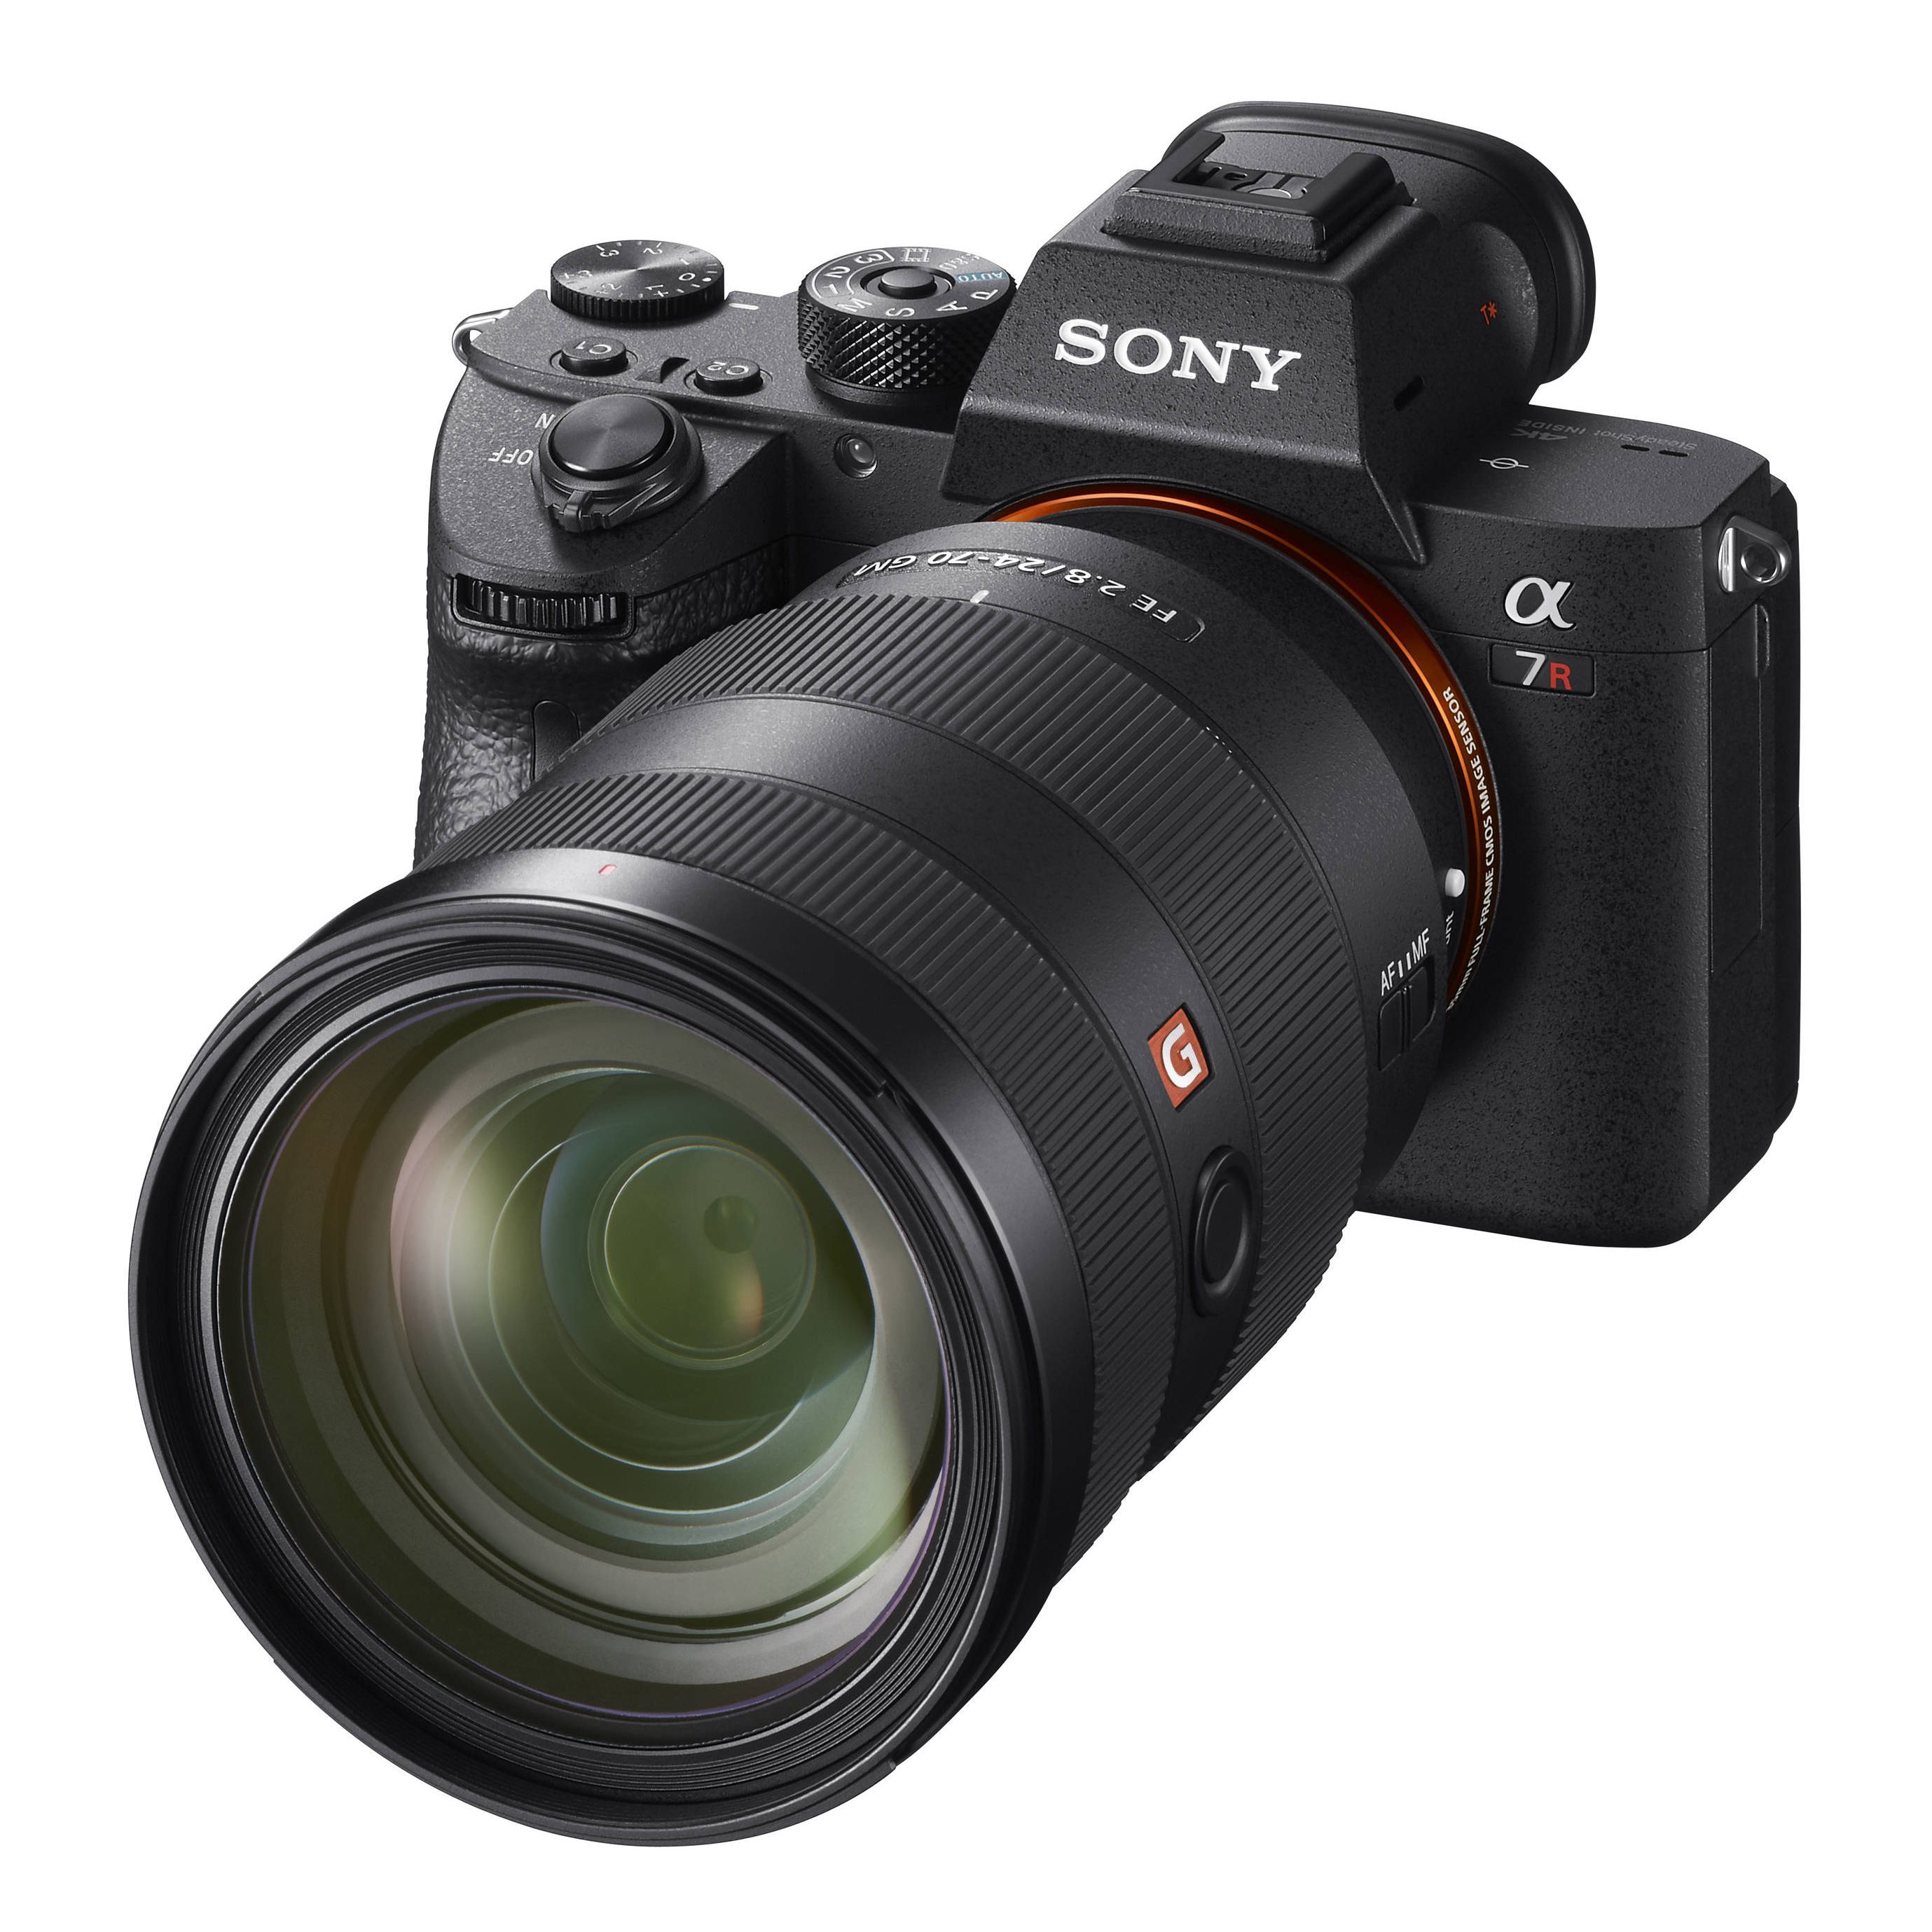 8 Best Sony Camera Reviews in 2018 - Top Rated Digital and 